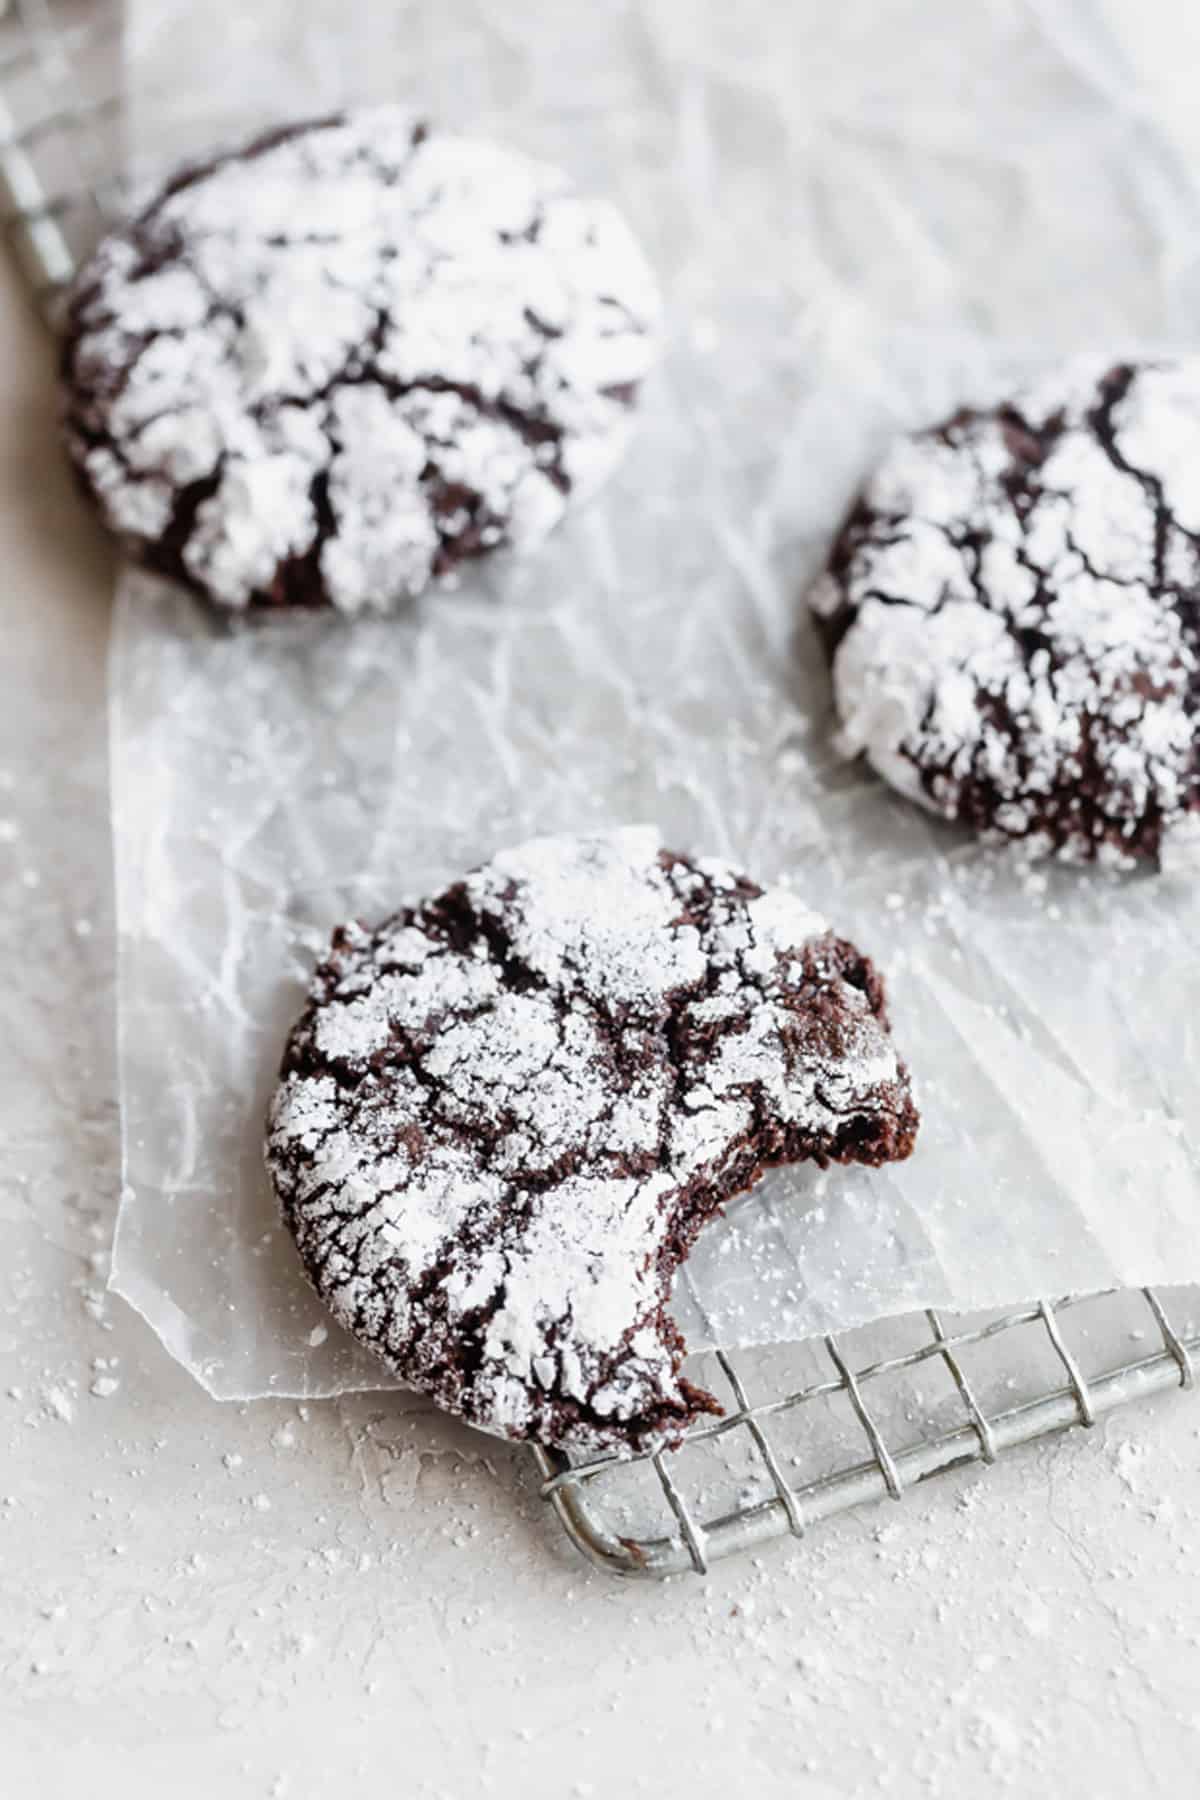 A Chocolate Crinkle Cookie with a bite taken from it, on a metal cooling rack on a white background.